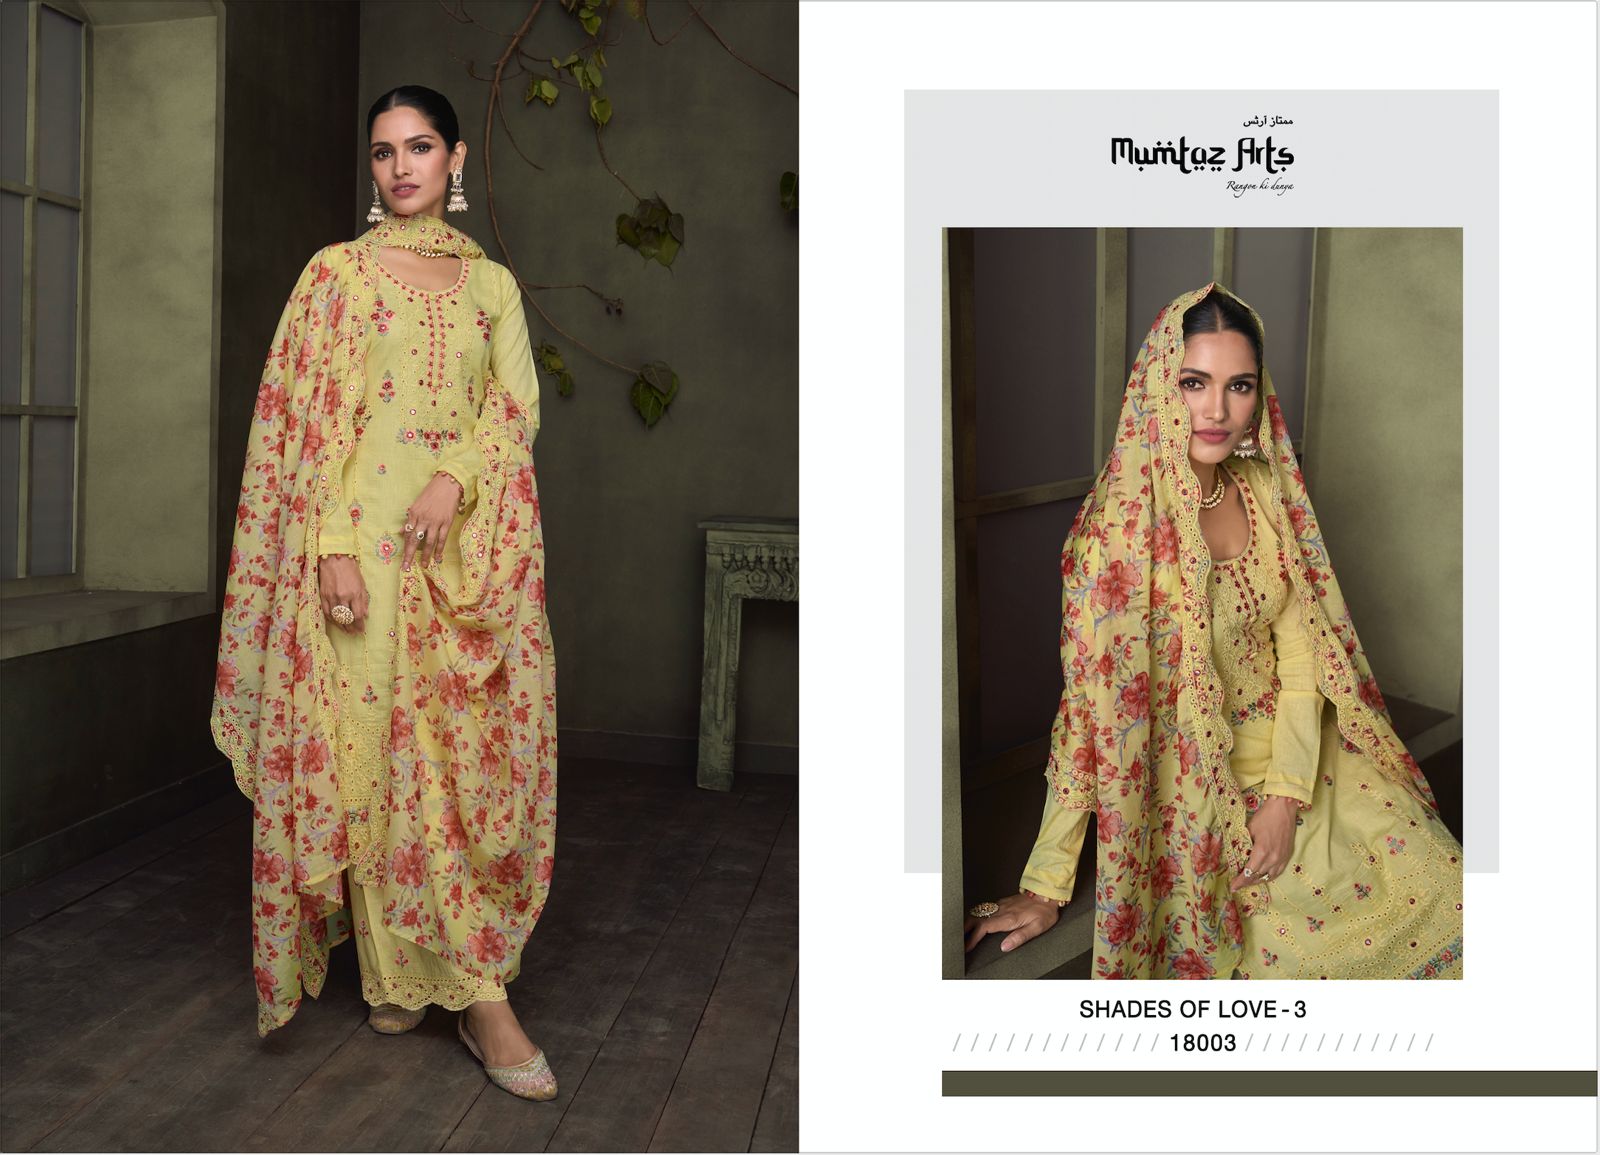 Mumtaz Shades Of Love 3 collection 3